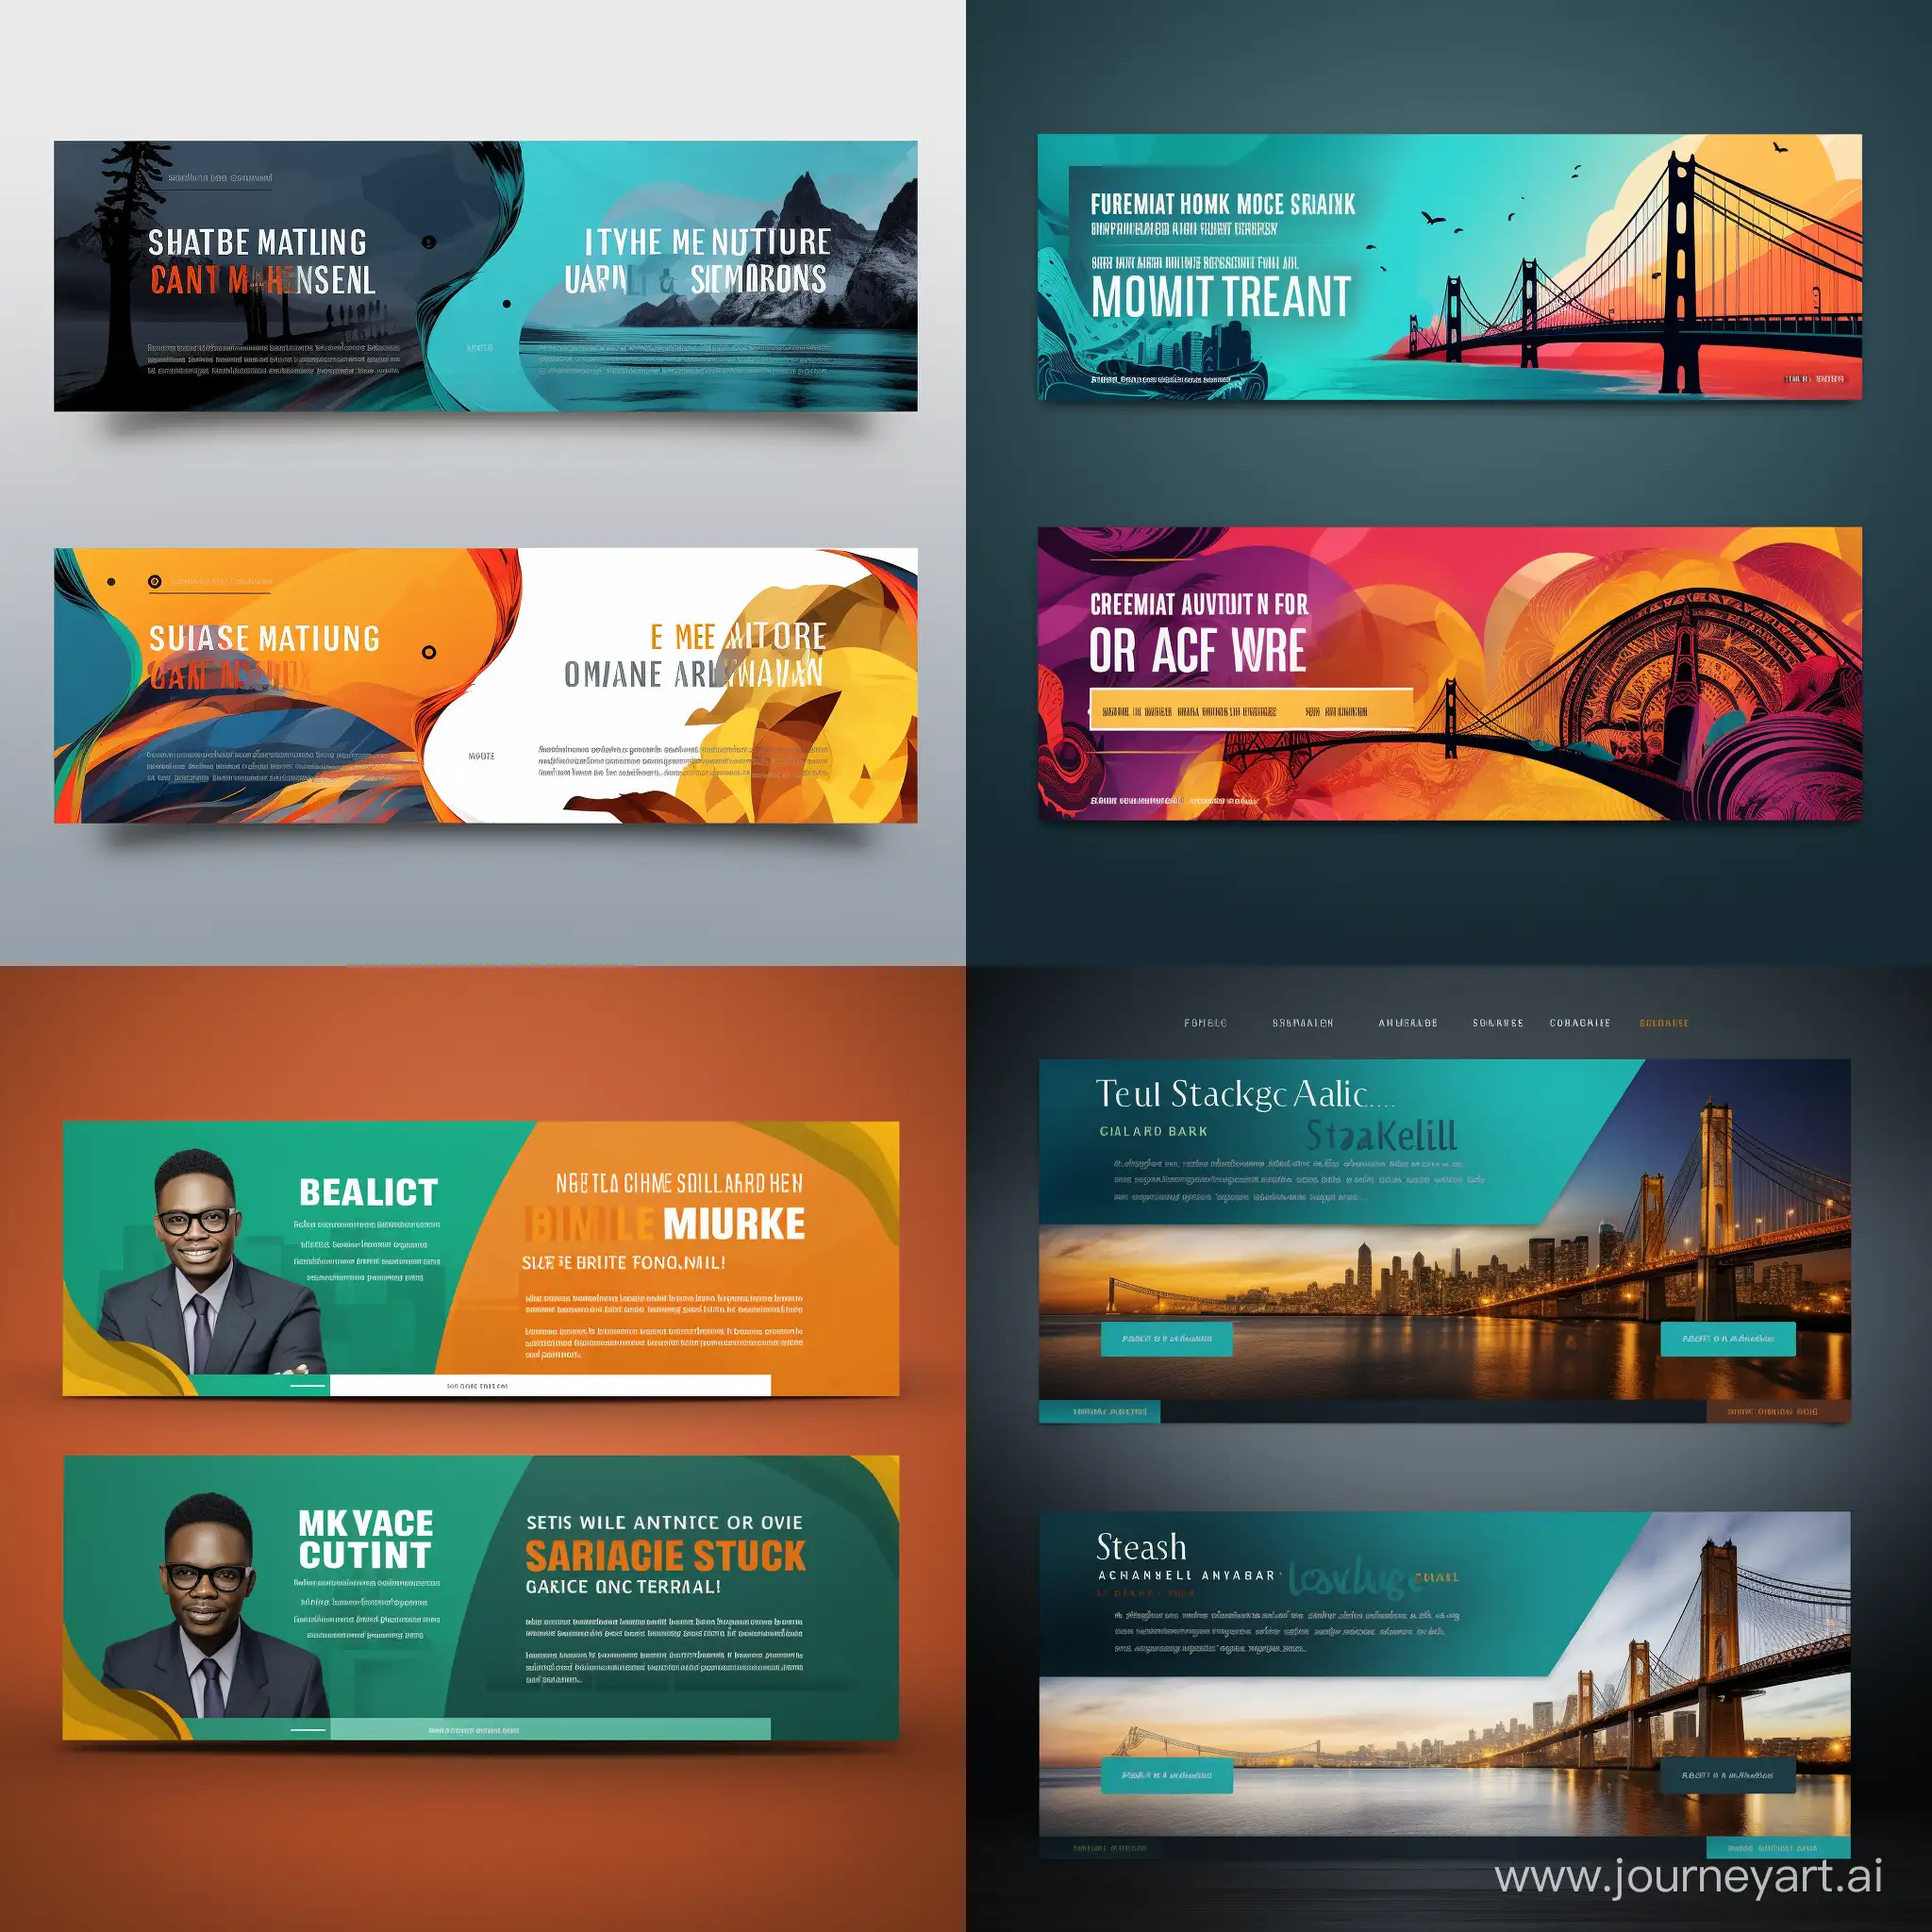 EyeCatching-Professional-Web-Banner-Design-in-11-Aspect-Ratio